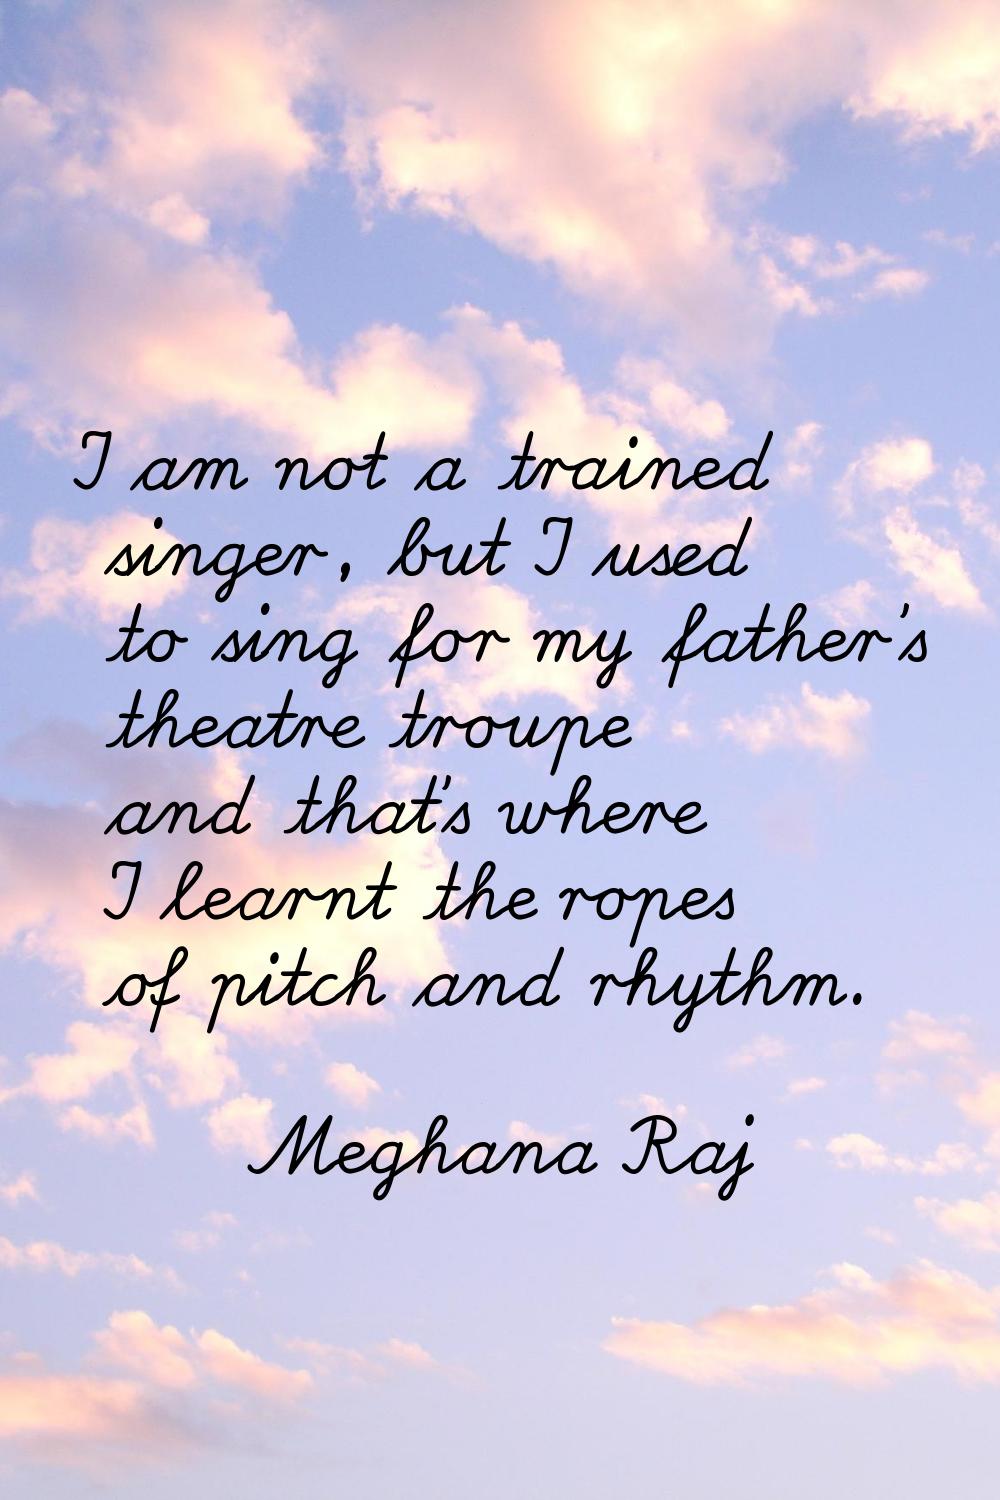 I am not a trained singer, but I used to sing for my father's theatre troupe and that's where I lea